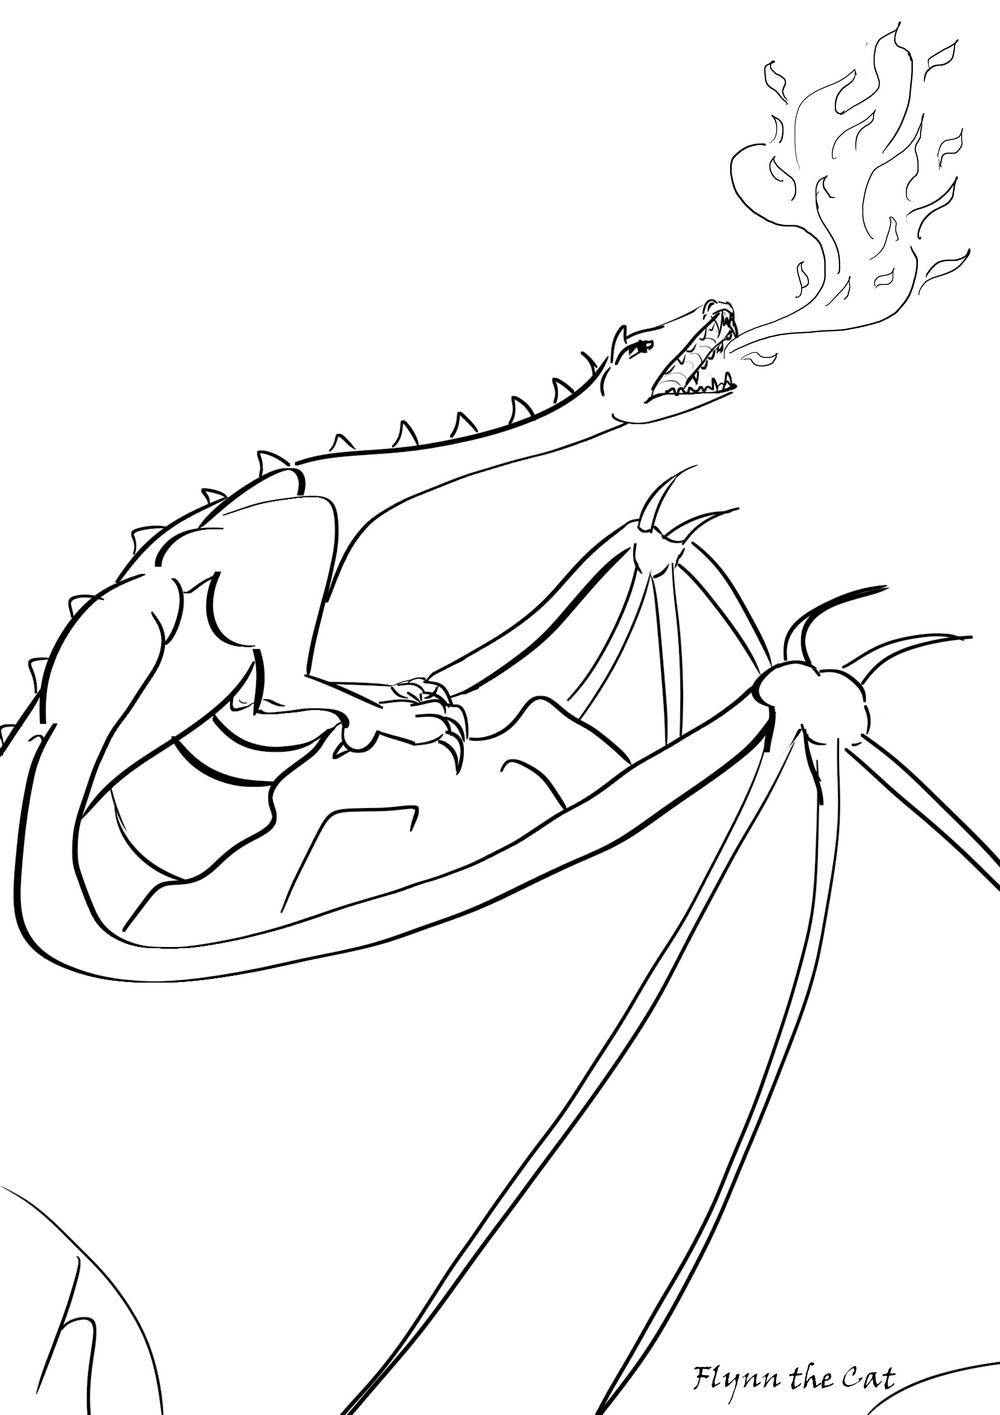 Coloring Dragon and tongues of the flame. Category Fire. Tags:  dragon, wings, fire.